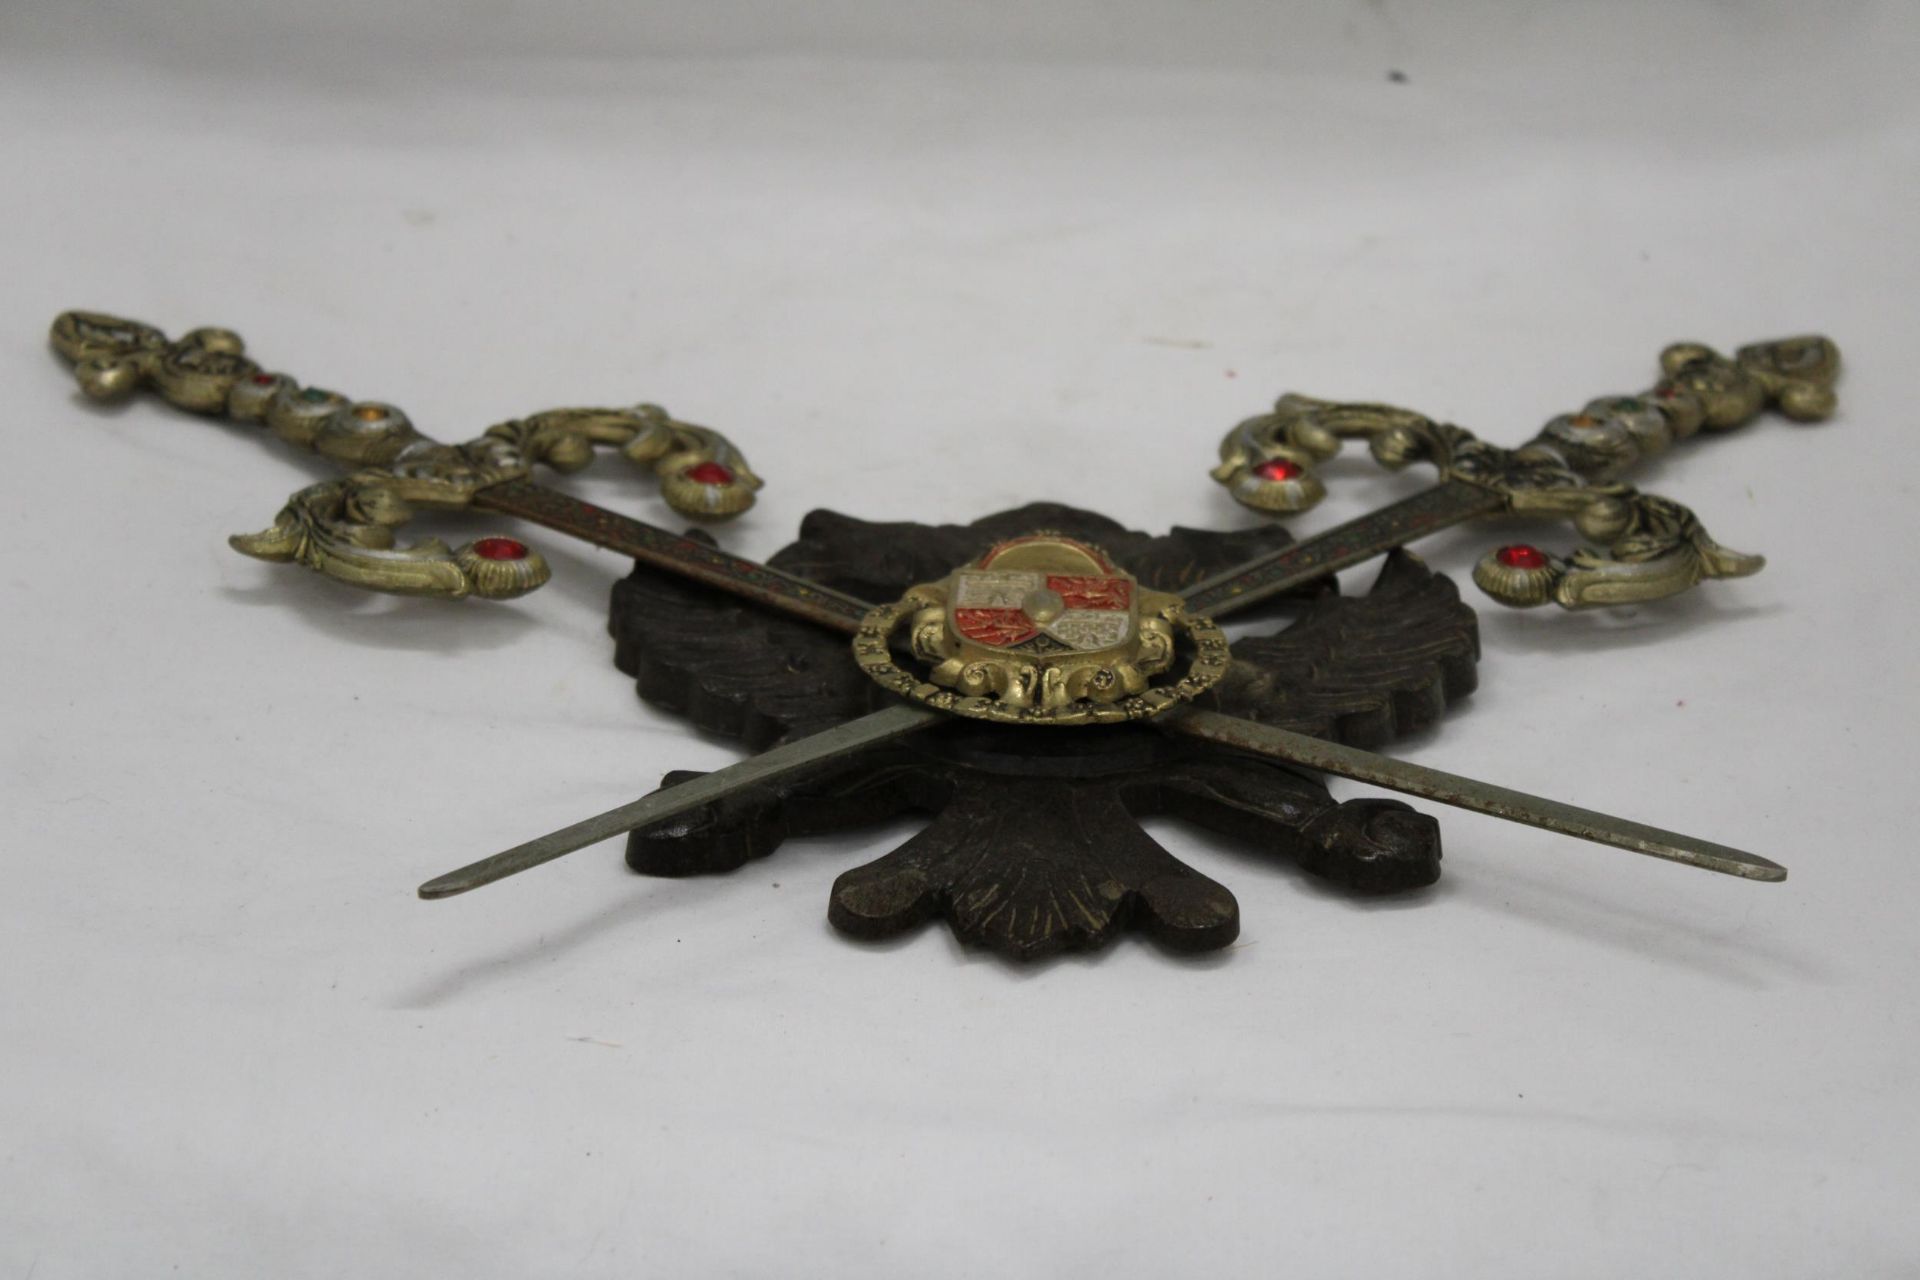 TWO VINTAGE SWORDS ON A CRESTED PLAQUE - Image 5 of 5